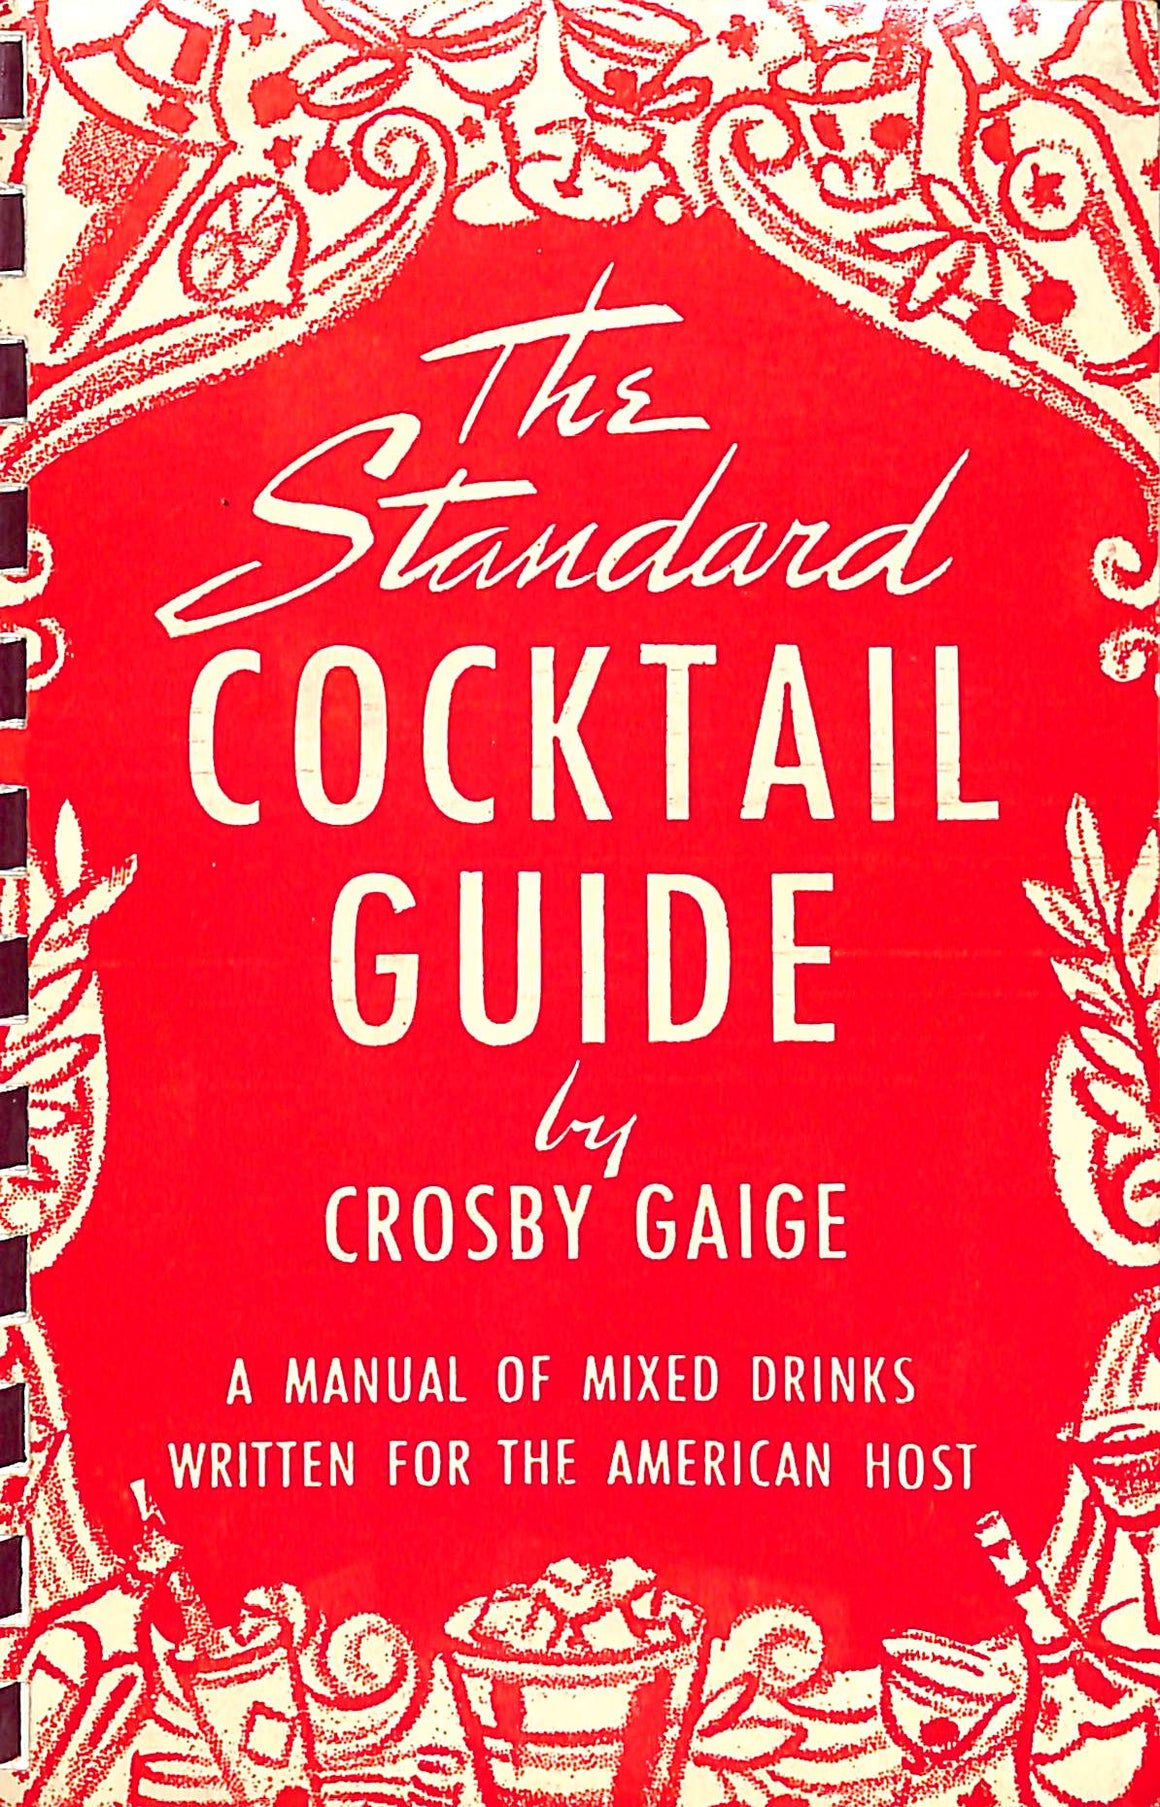 "The Standard Cocktail Guide" 1958 GAIGE, Crosby